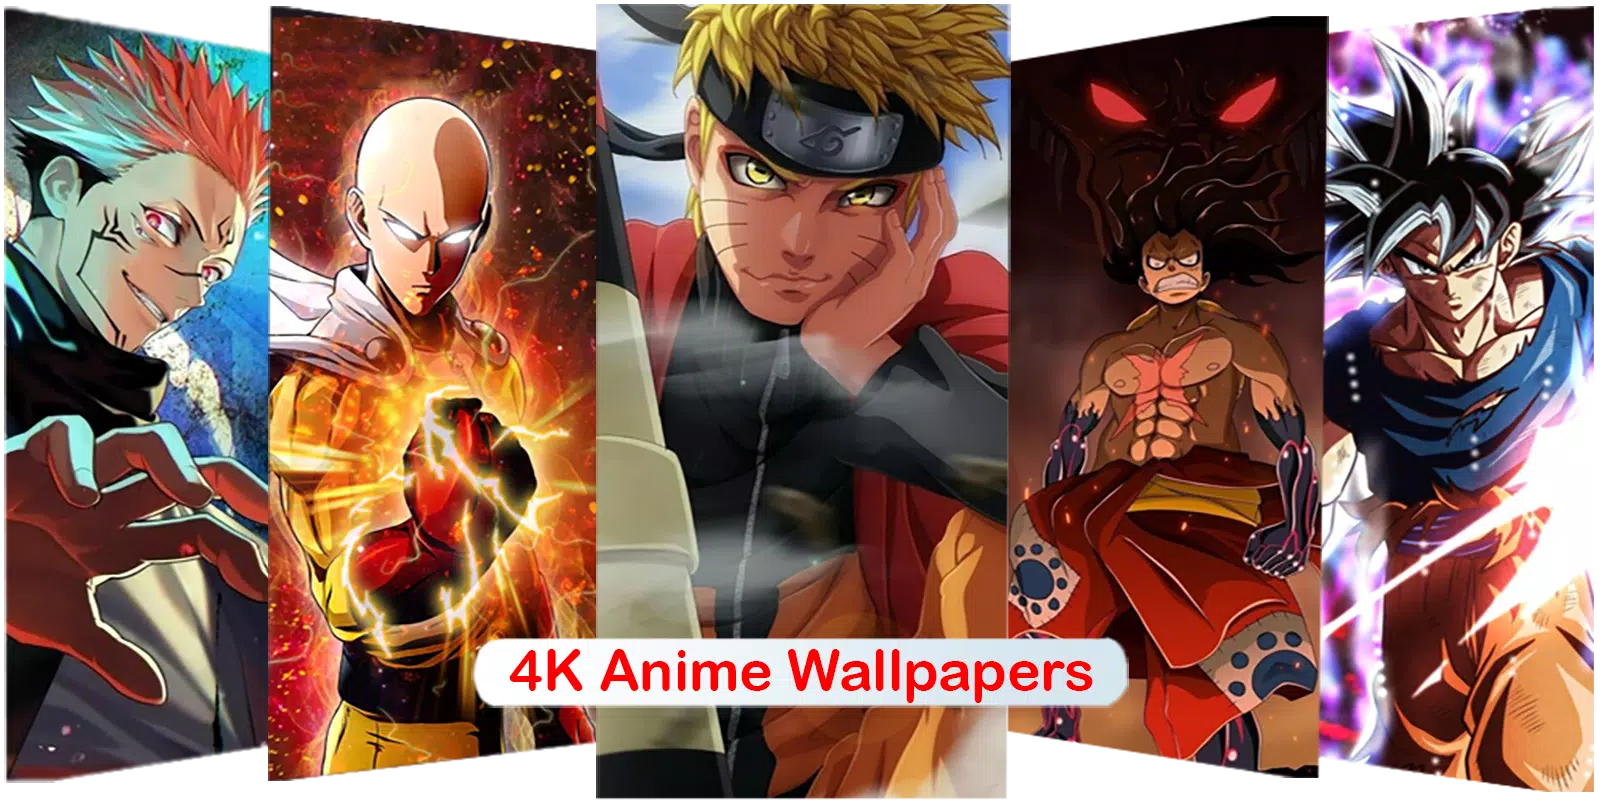 Download Anime Wallpaper HD 4K APK for Android, Run on PC